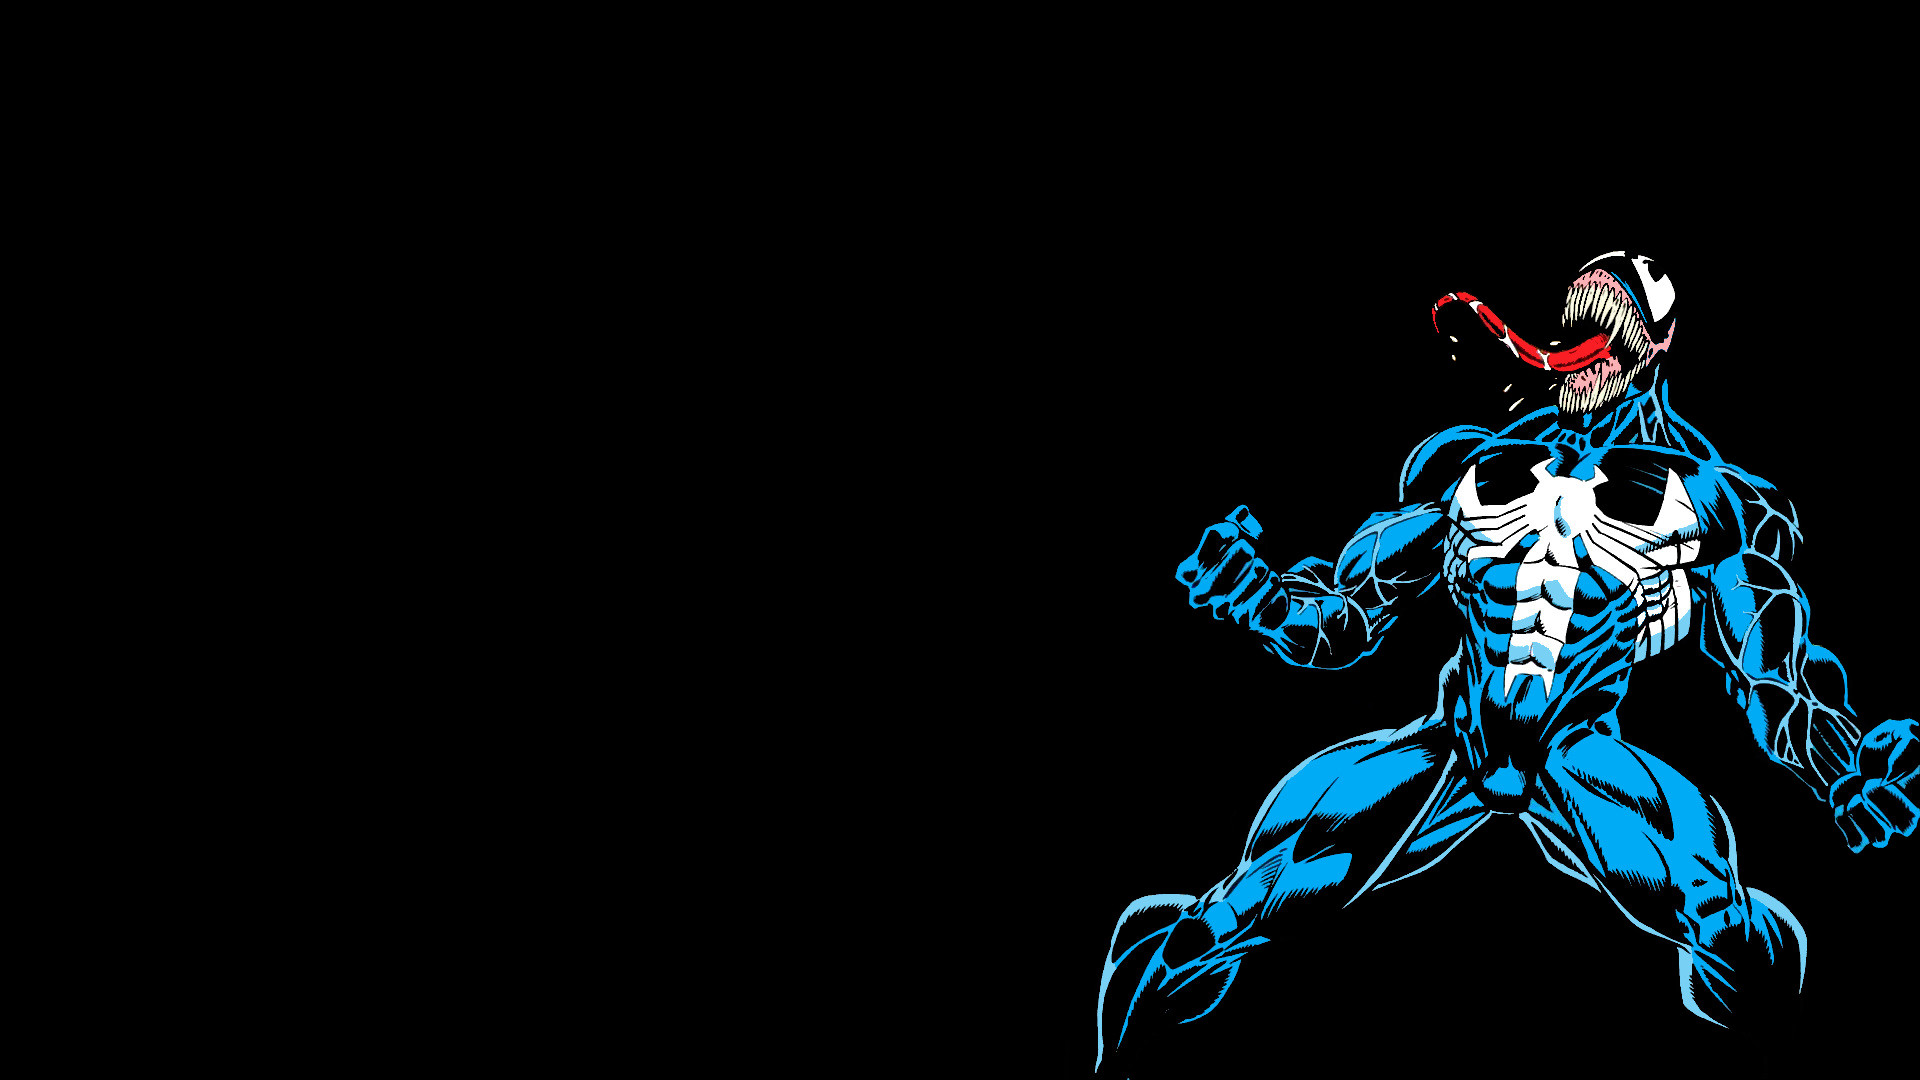 1920x1080 By Request: Venom - ASM #378 -  Need #iPhone #6S #